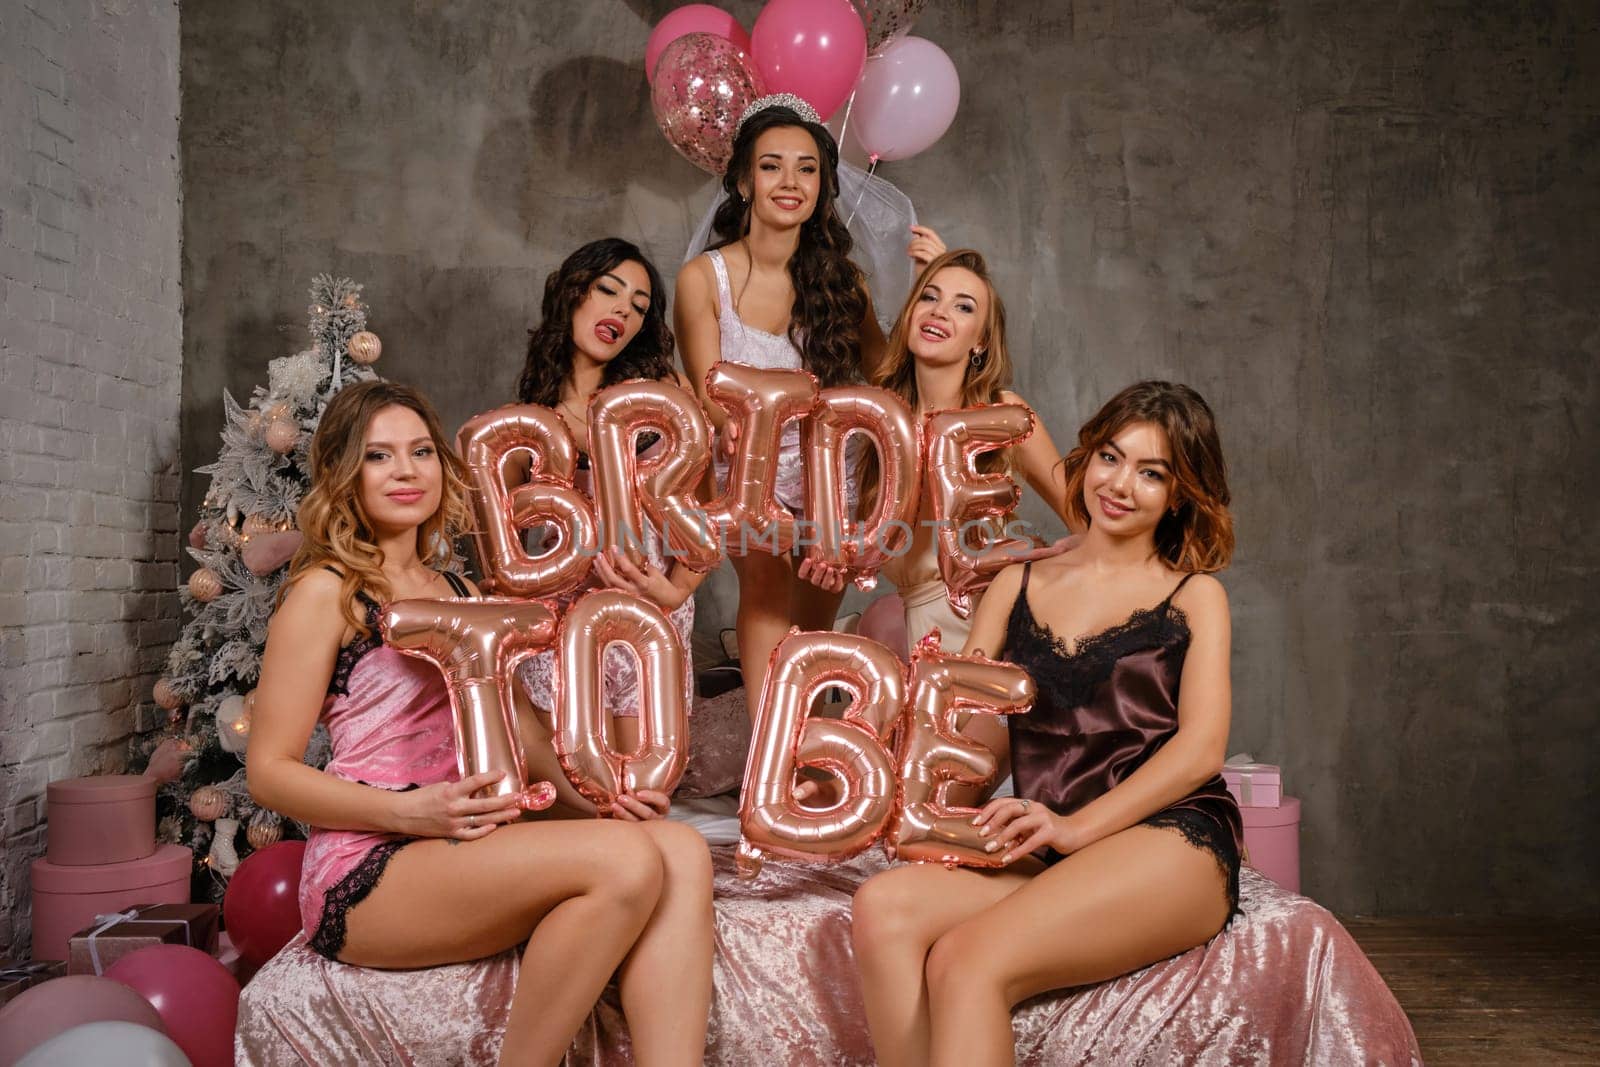 Pretty women in sexy lingerie and bride in veil, enjoying bachelorette party, sitting on bed, smiling, holding balloons in form of letters, built sentence bride to be. Christmas decorations. Close-up.